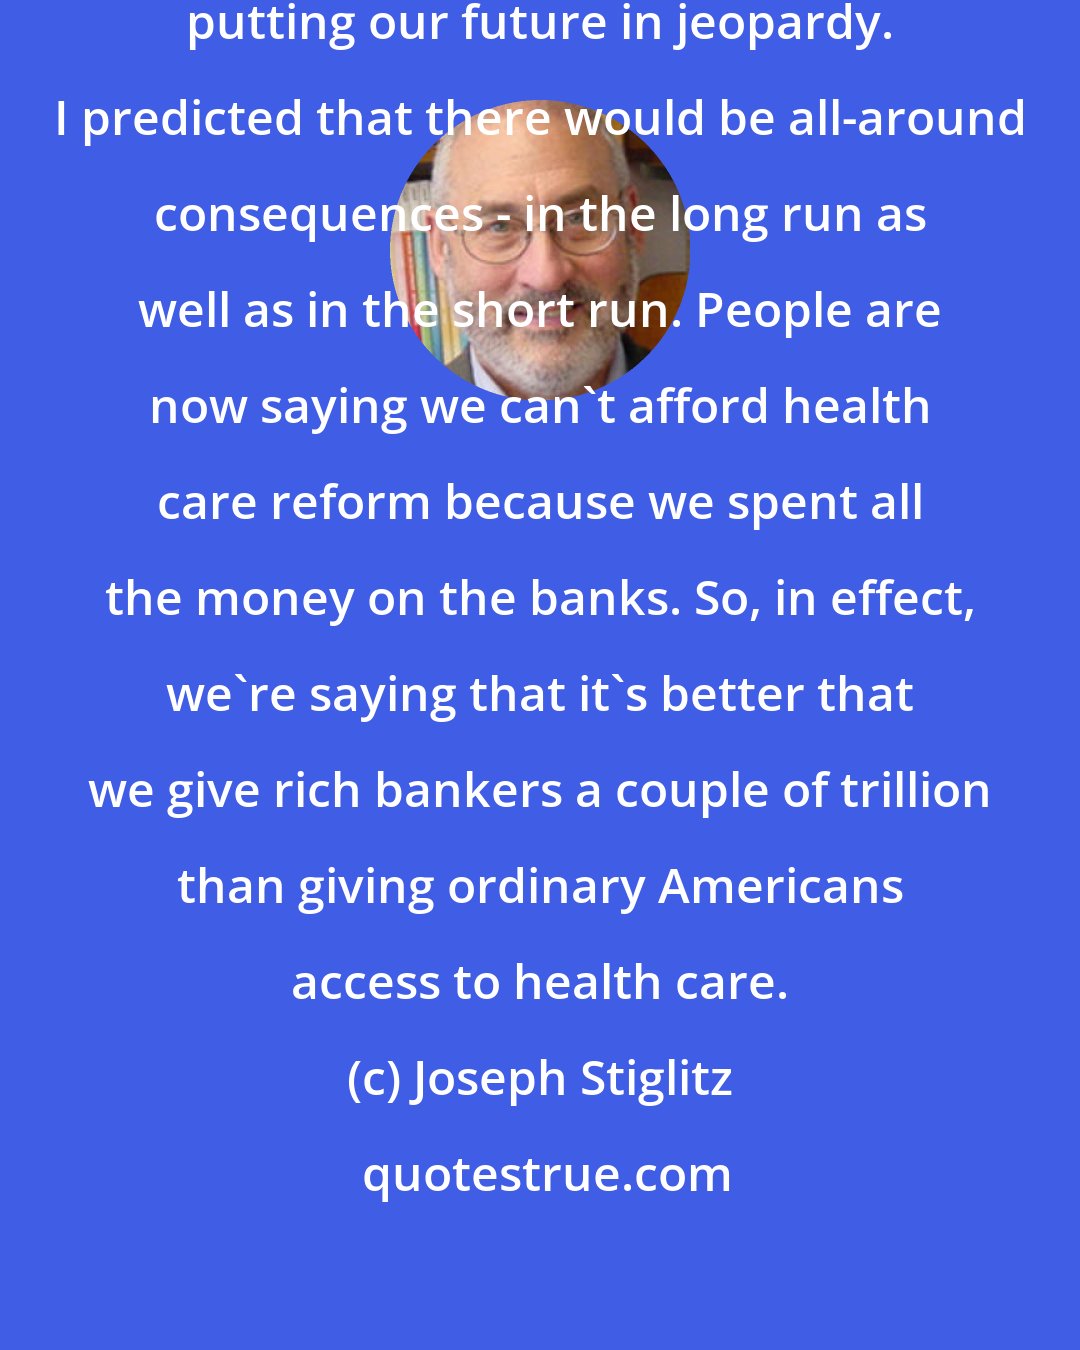 Joseph Stiglitz: We could have saved Wall Street without putting our future in jeopardy. I predicted that there would be all-around consequences - in the long run as well as in the short run. People are now saying we can't afford health care reform because we spent all the money on the banks. So, in effect, we're saying that it's better that we give rich bankers a couple of trillion than giving ordinary Americans access to health care.